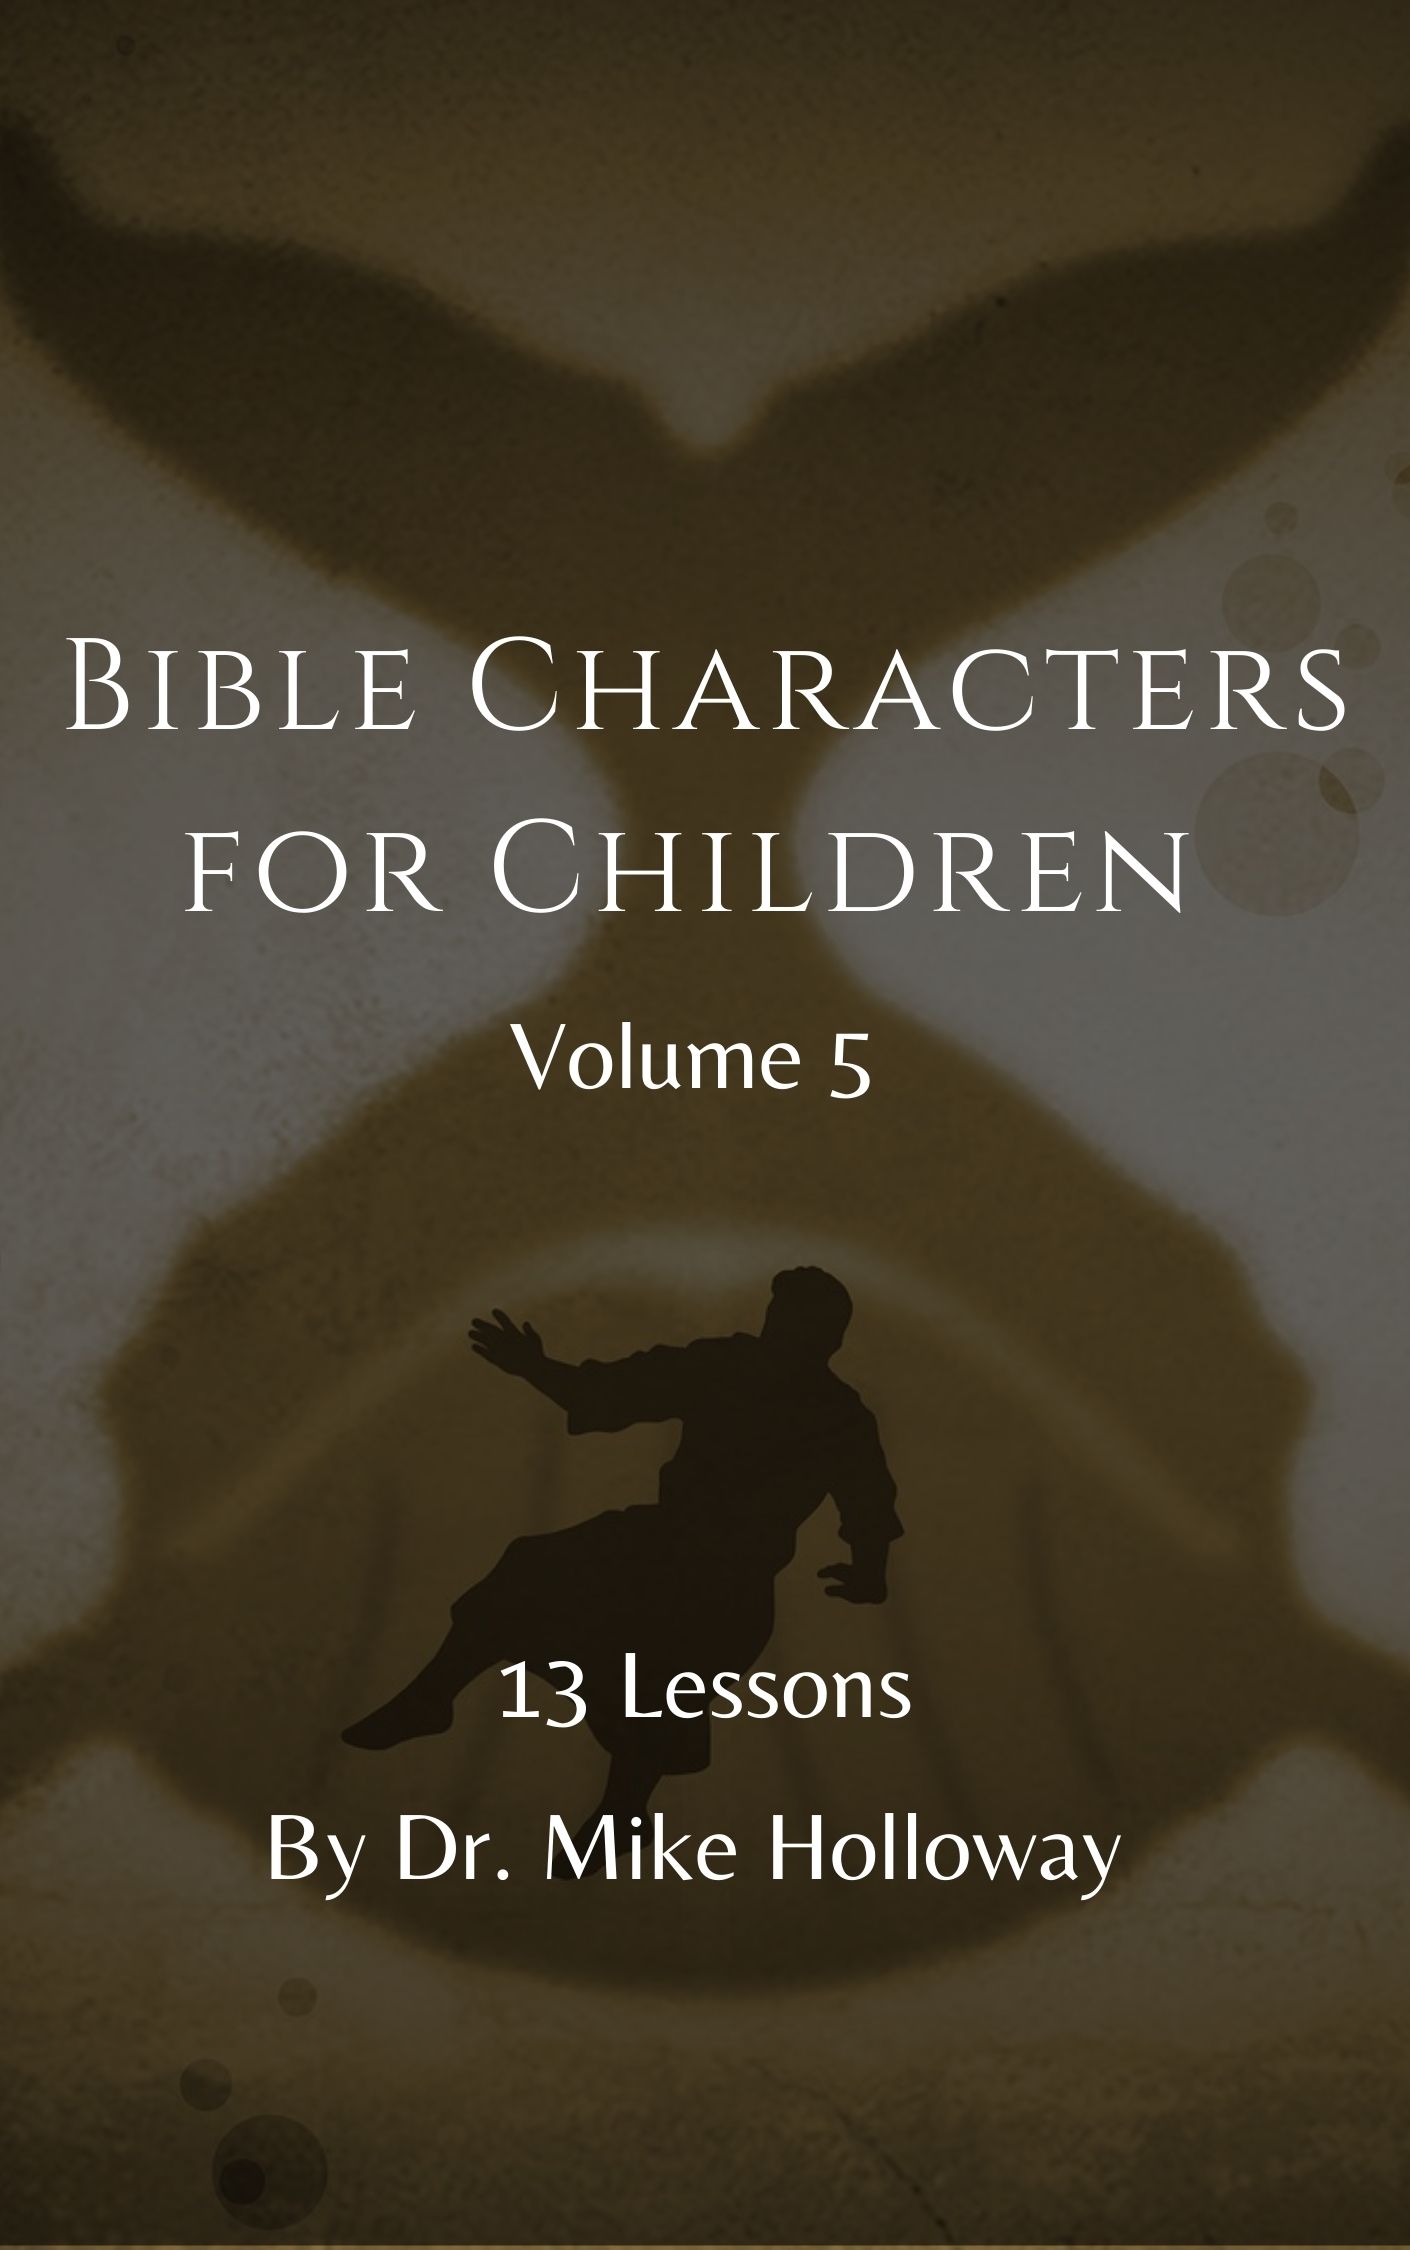 Bible Characters for Children – Volume 5